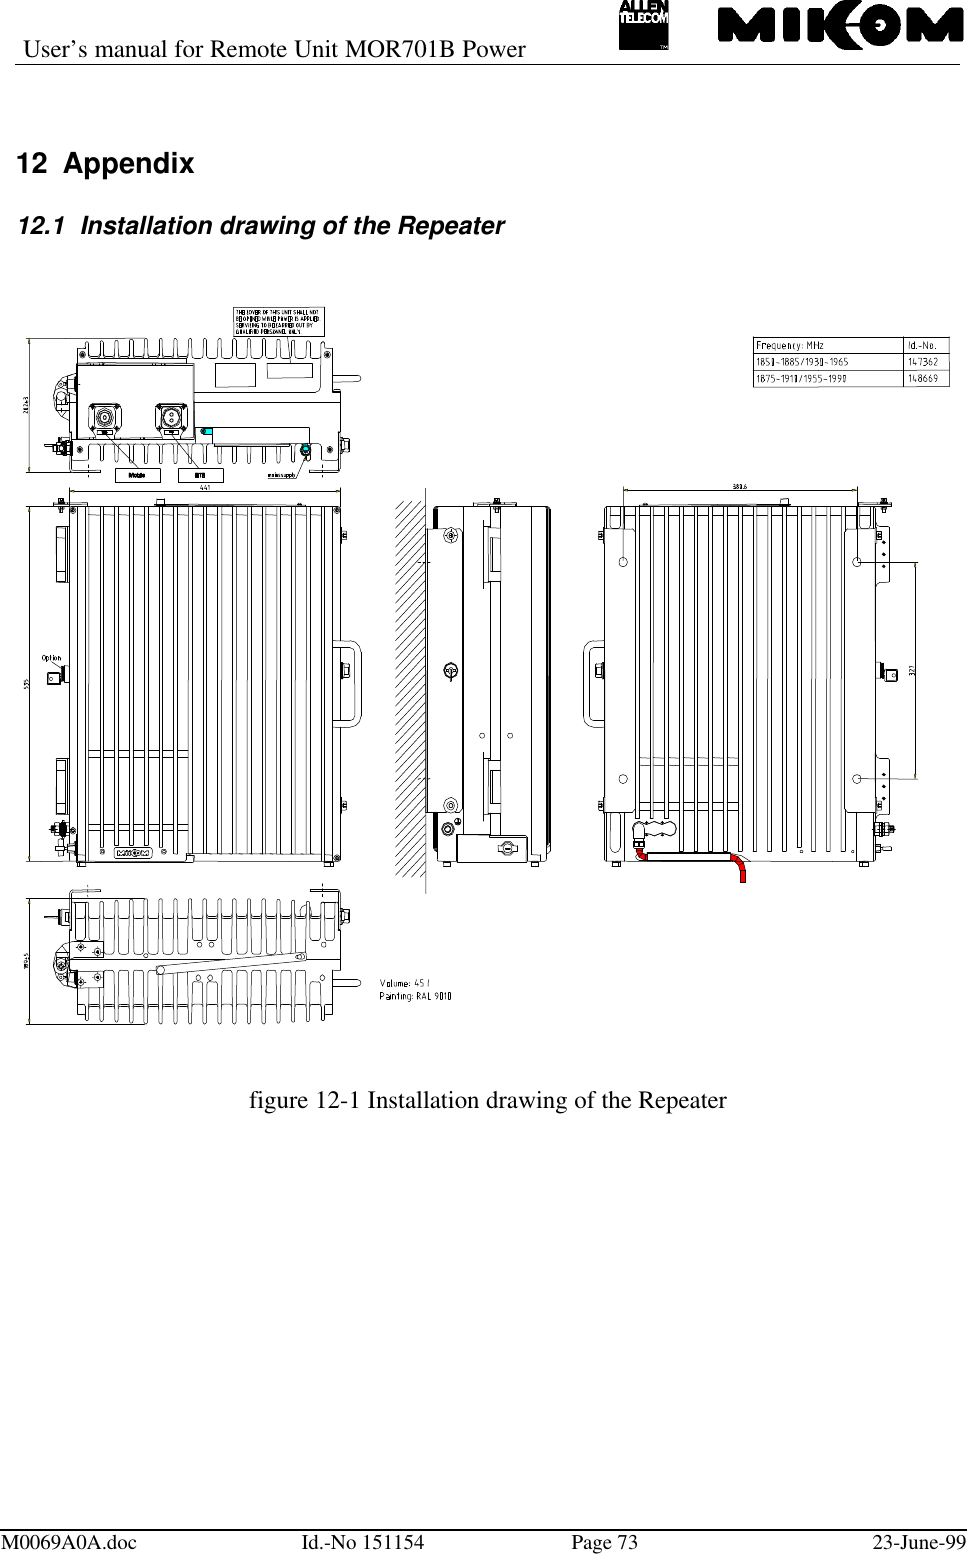 User’s manual for Remote Unit MOR701B PowerM0069A0A.doc Id.-No 151154 Page 73 23-June-9912 Appendix12.1 Installation drawing of the Repeaterfigure 12-1 Installation drawing of the Repeater